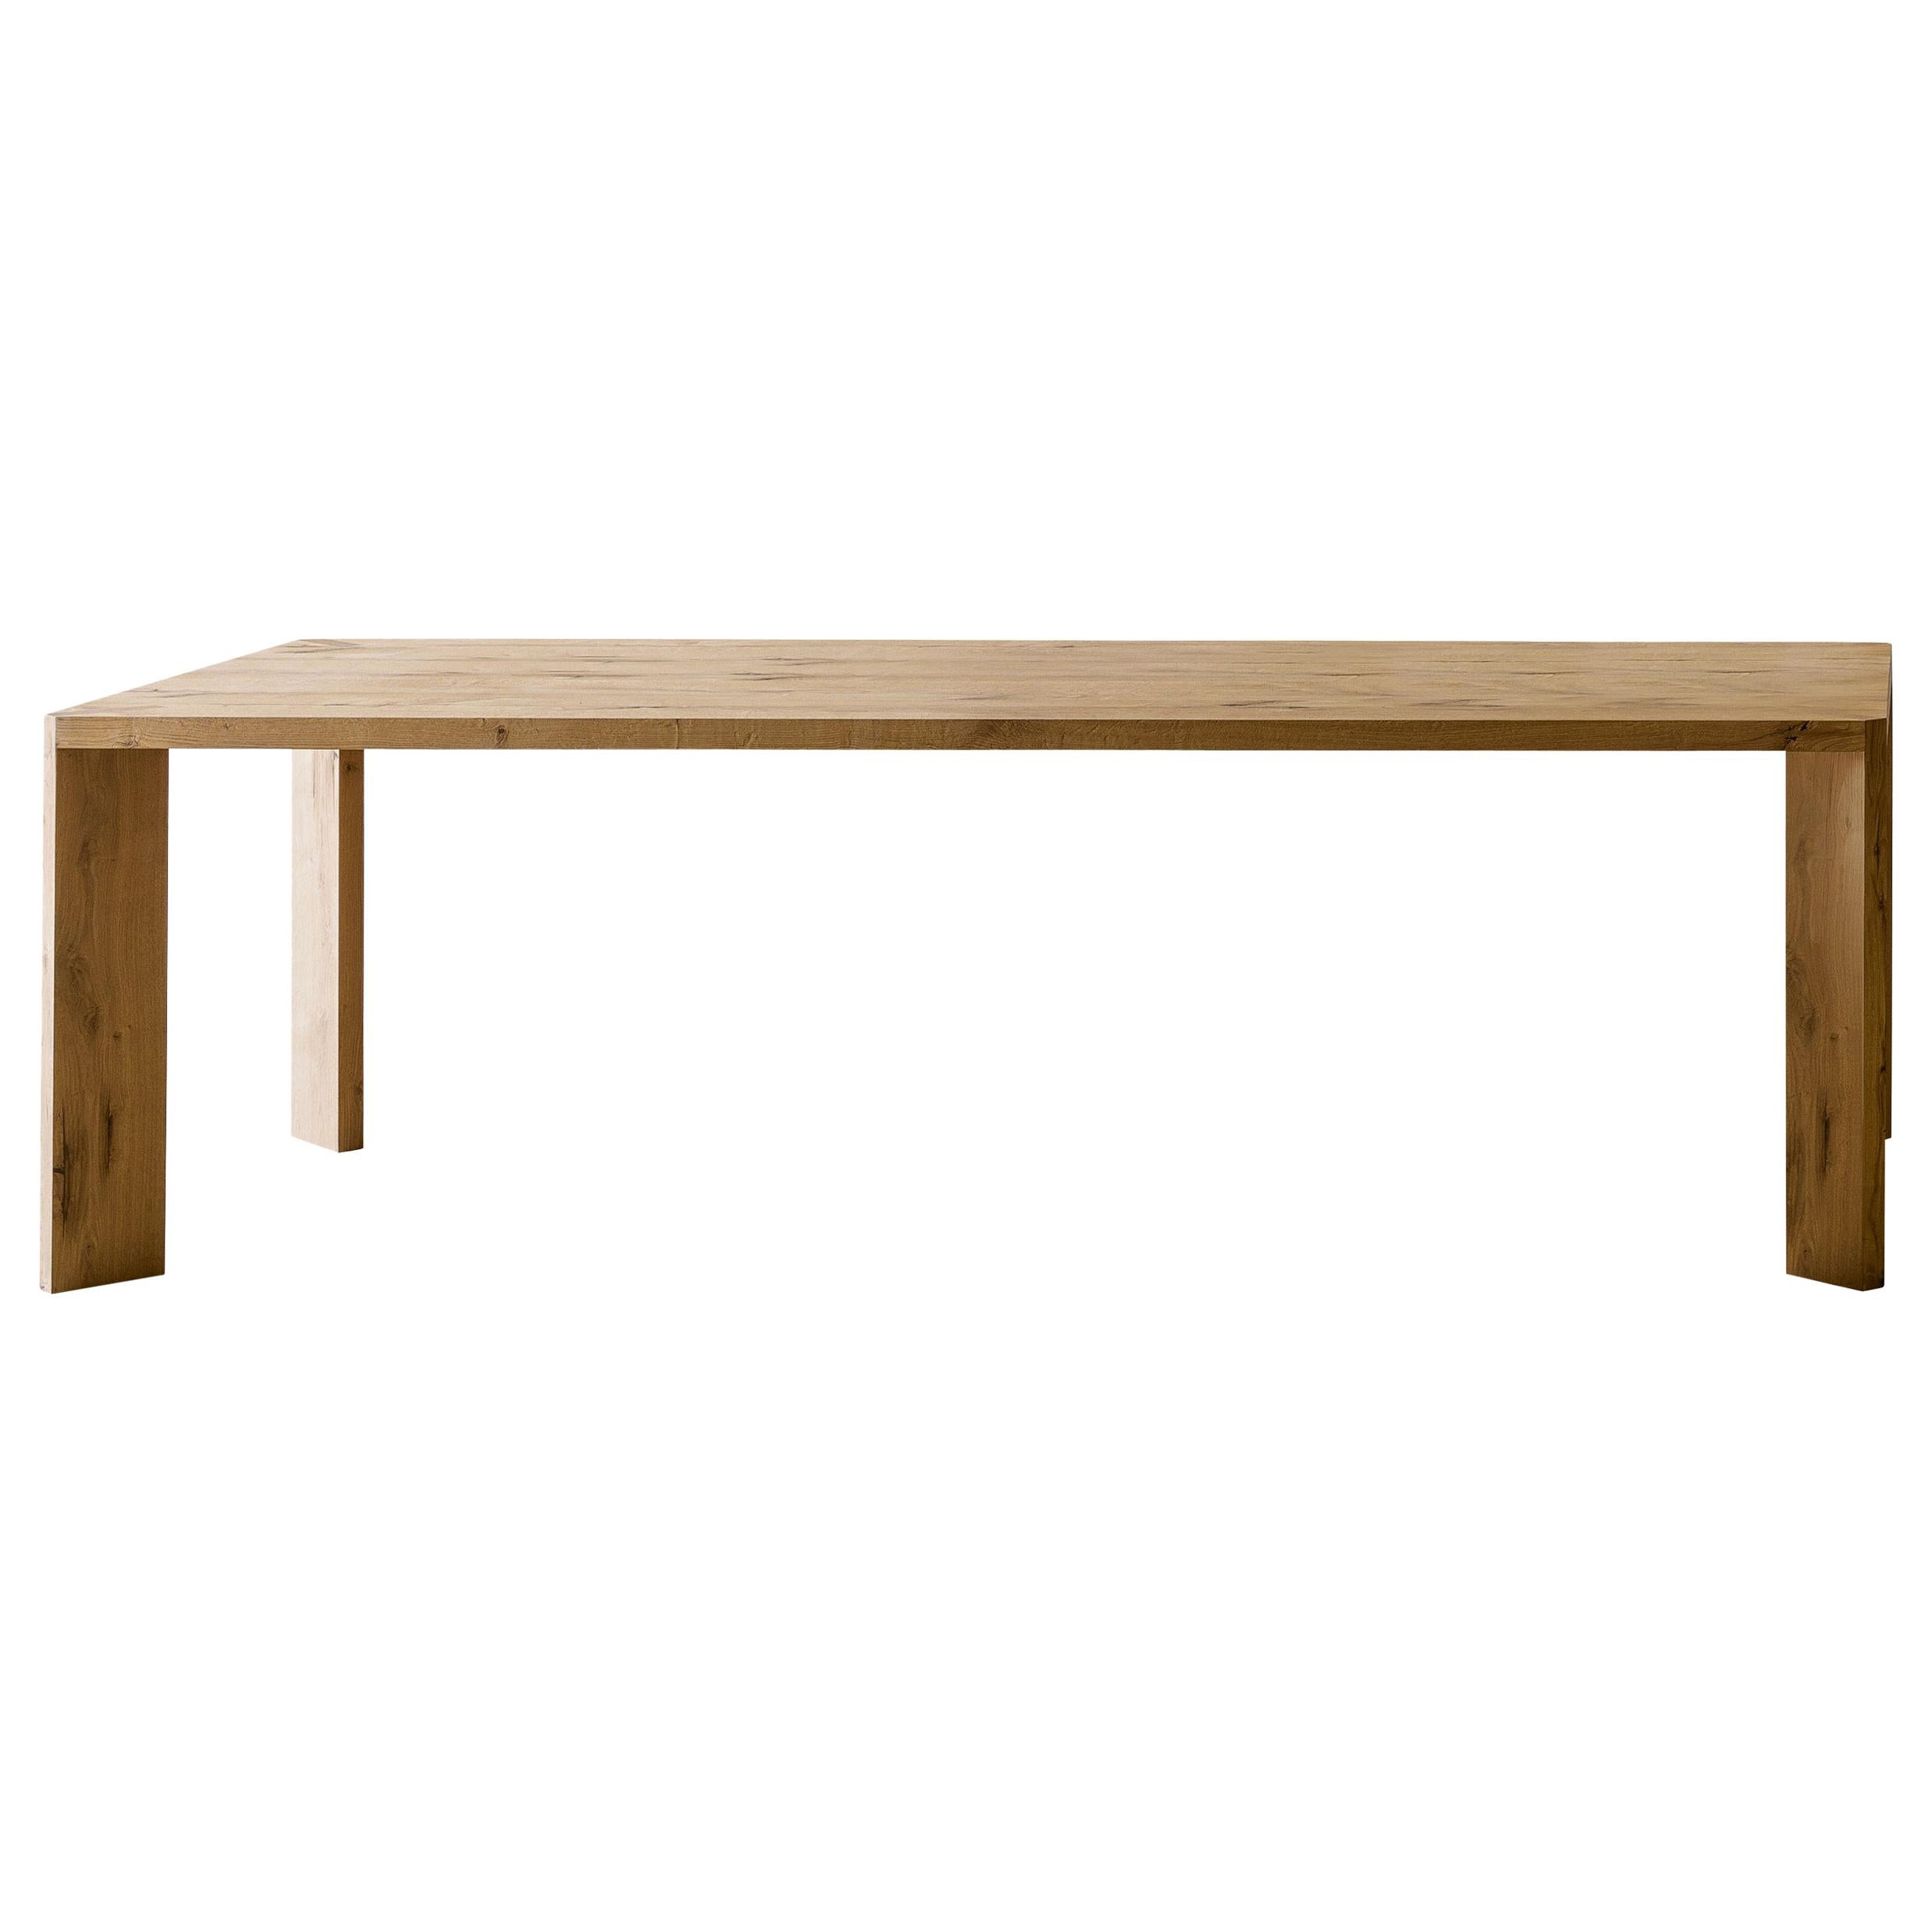 Manero Small Table in Vintage Oak by Paolo Cappello